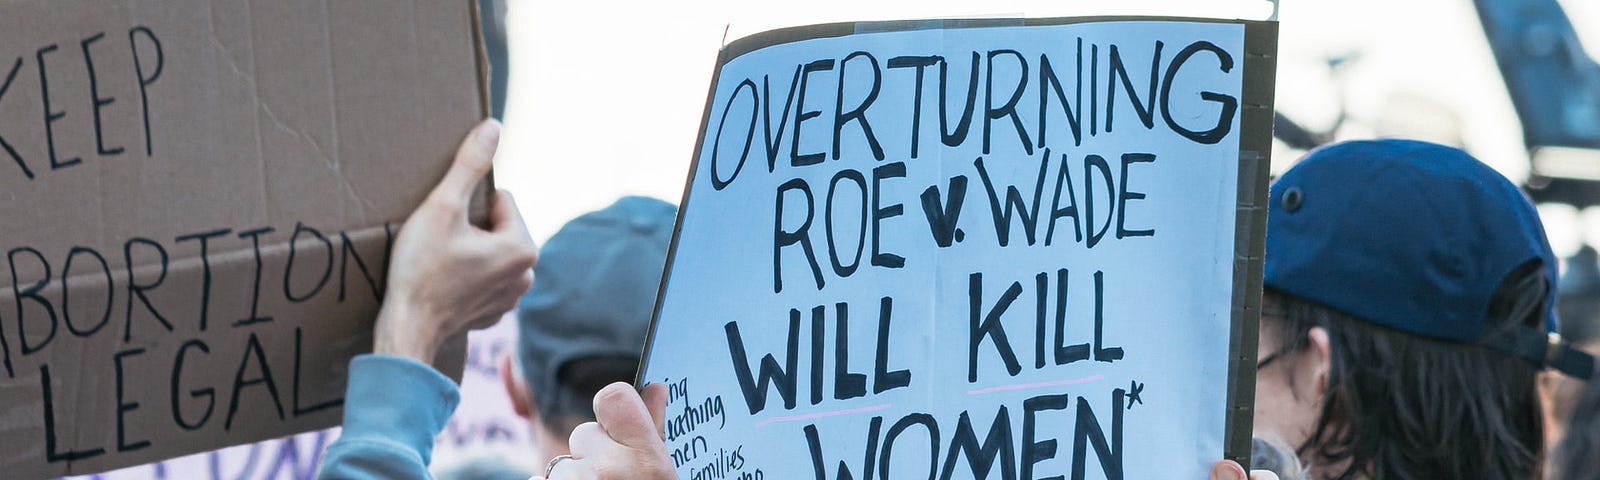 IMAGE: Signs at a demonstration reading “Keep abortion legal” and “Overturning Roe v. Wade will kill women”